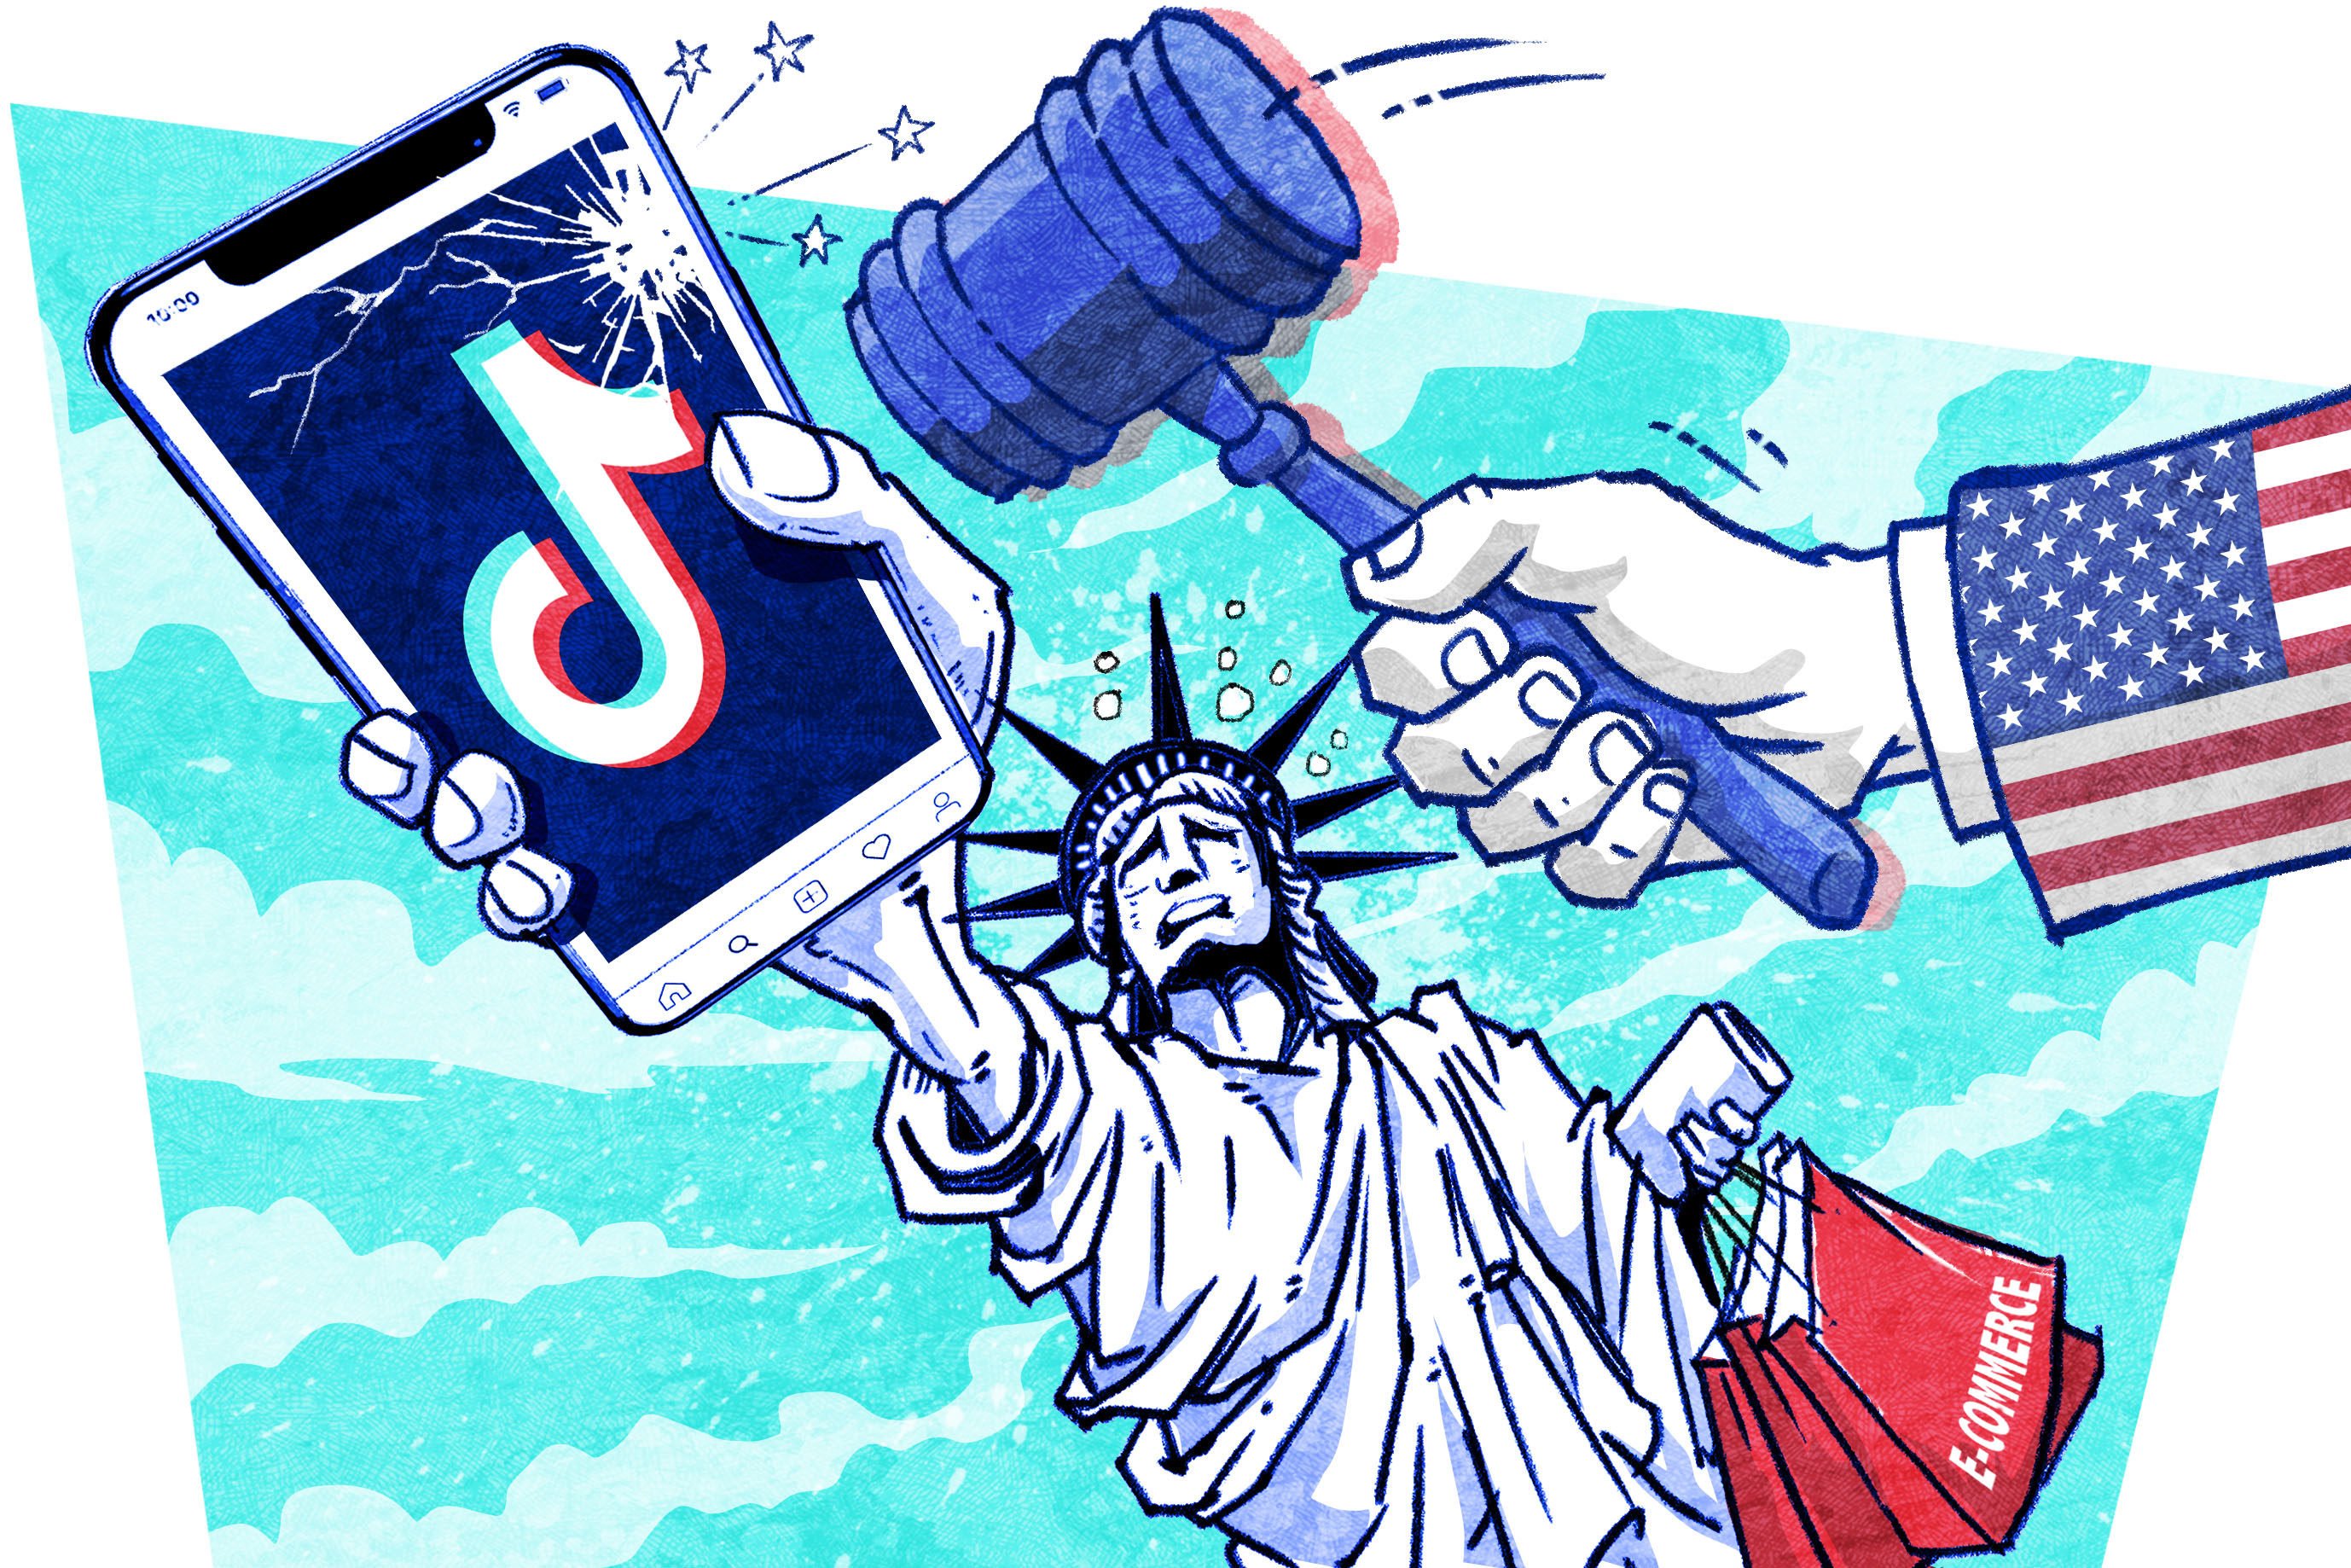 The US is forcing ByteDance to divest TikTok or face a ban, upending the future businesses of Chinese merchants on TikTok Shop. Illustration: Henry Wong